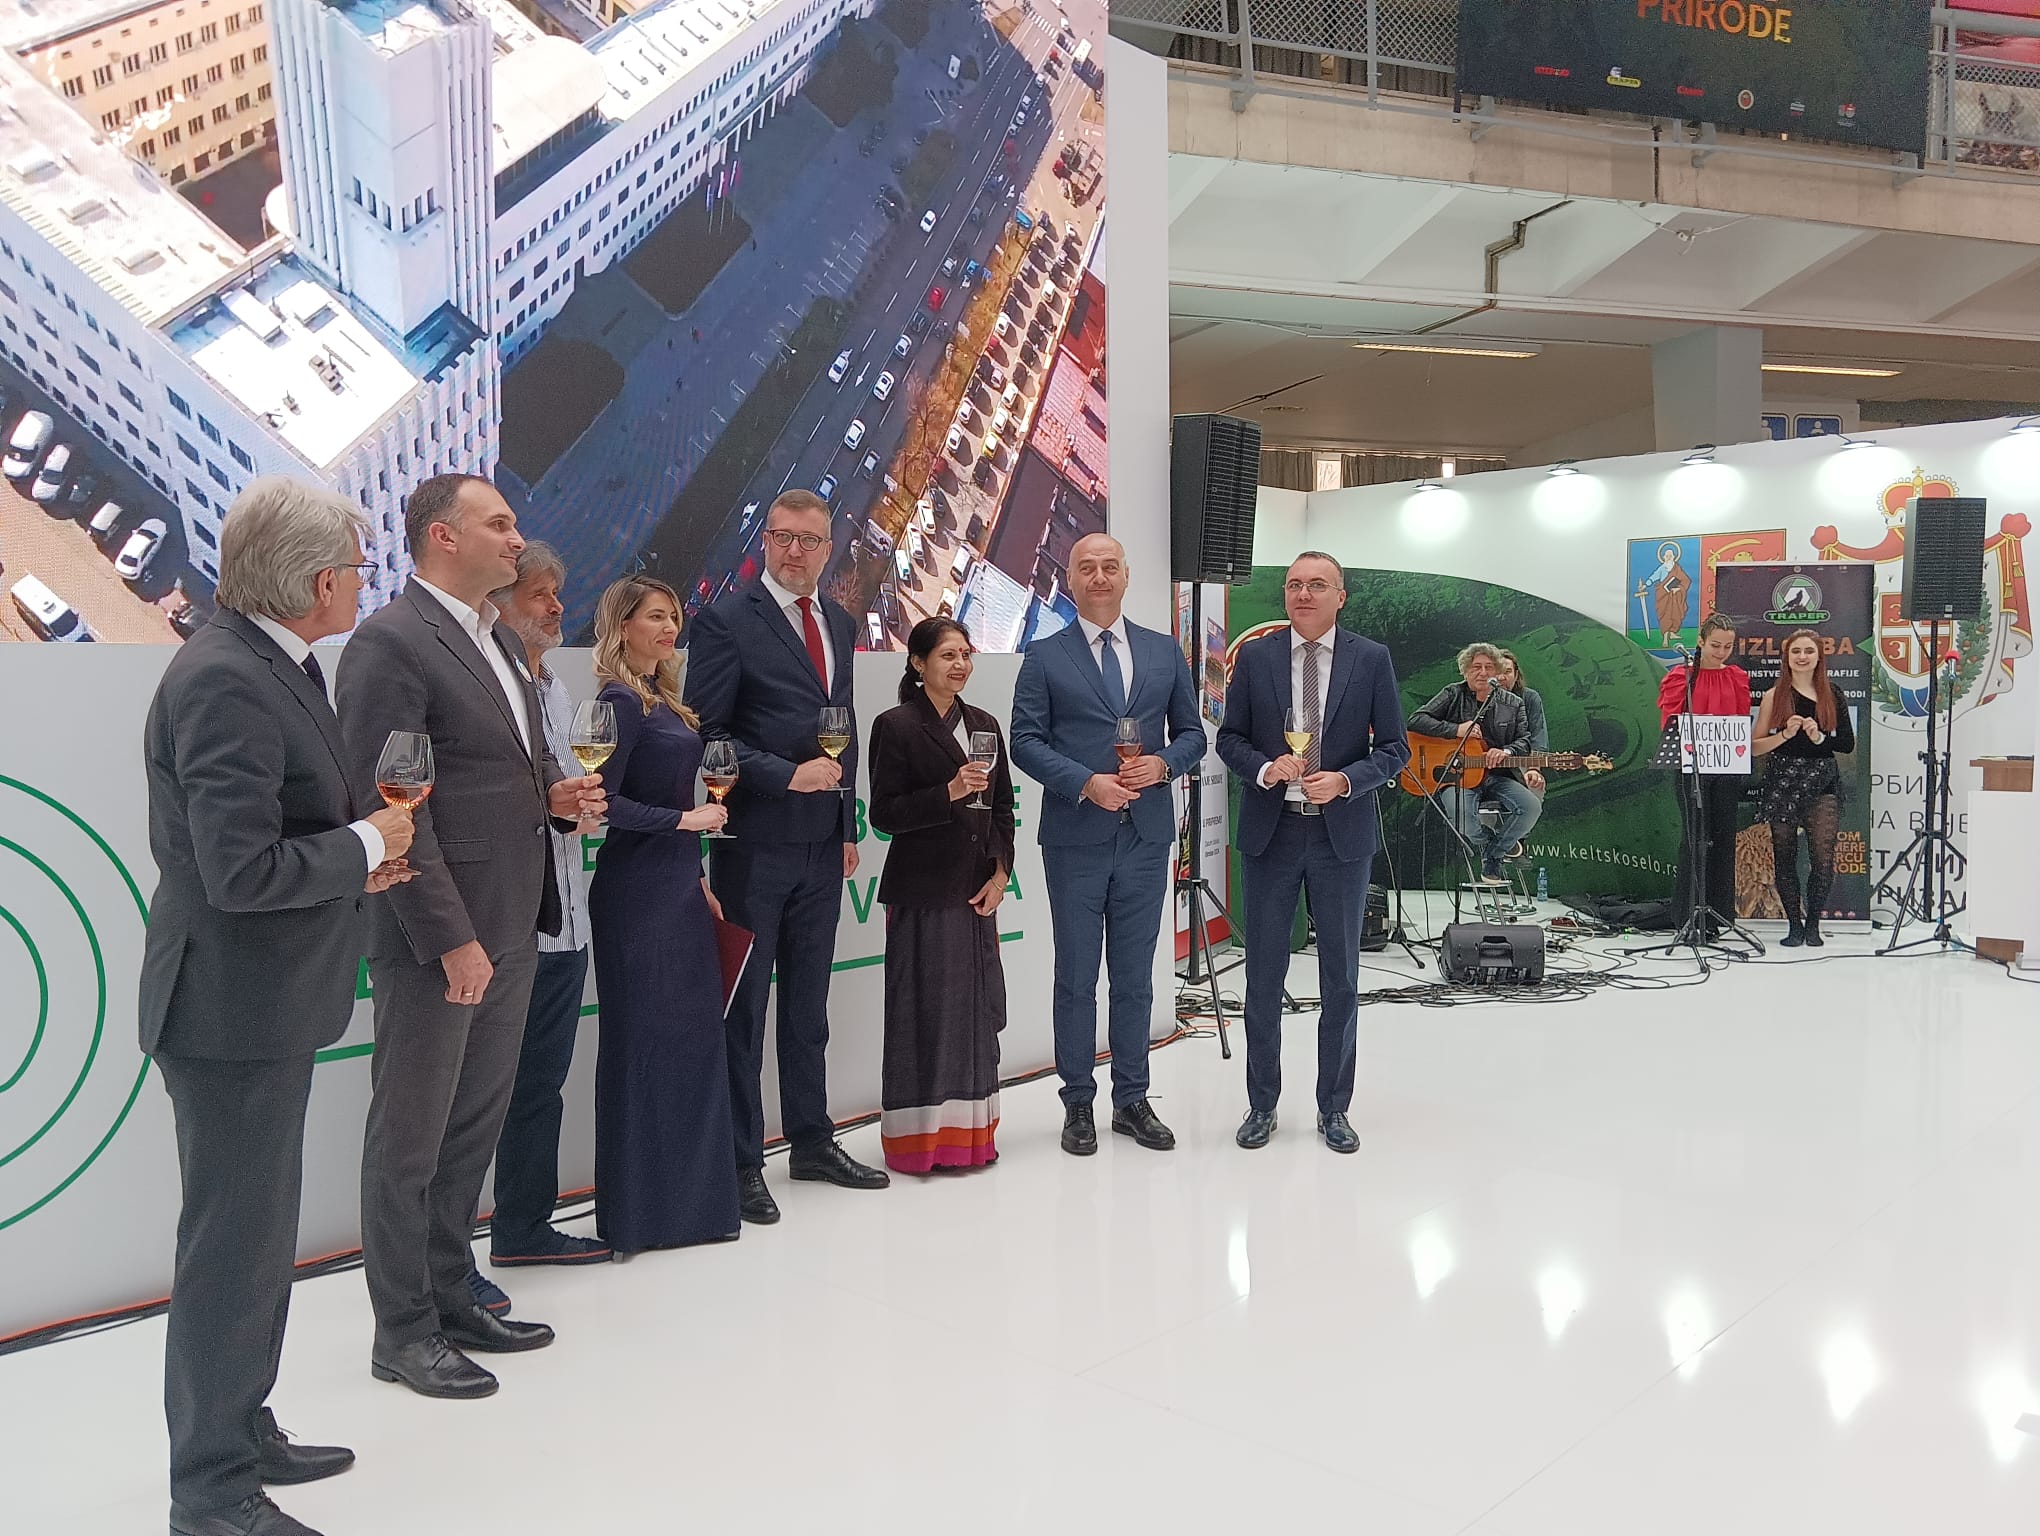 Ambassador Ms. Shubhdarshini Tripathi attended the opening ceremony of 45th International Tourism Fair on 22 February 2024 where embassy of India in Belgrade partnered with the Vojvodina province for the 45th International Tourism Fair in Belgrade and set up an India corner - 22 February 2024.